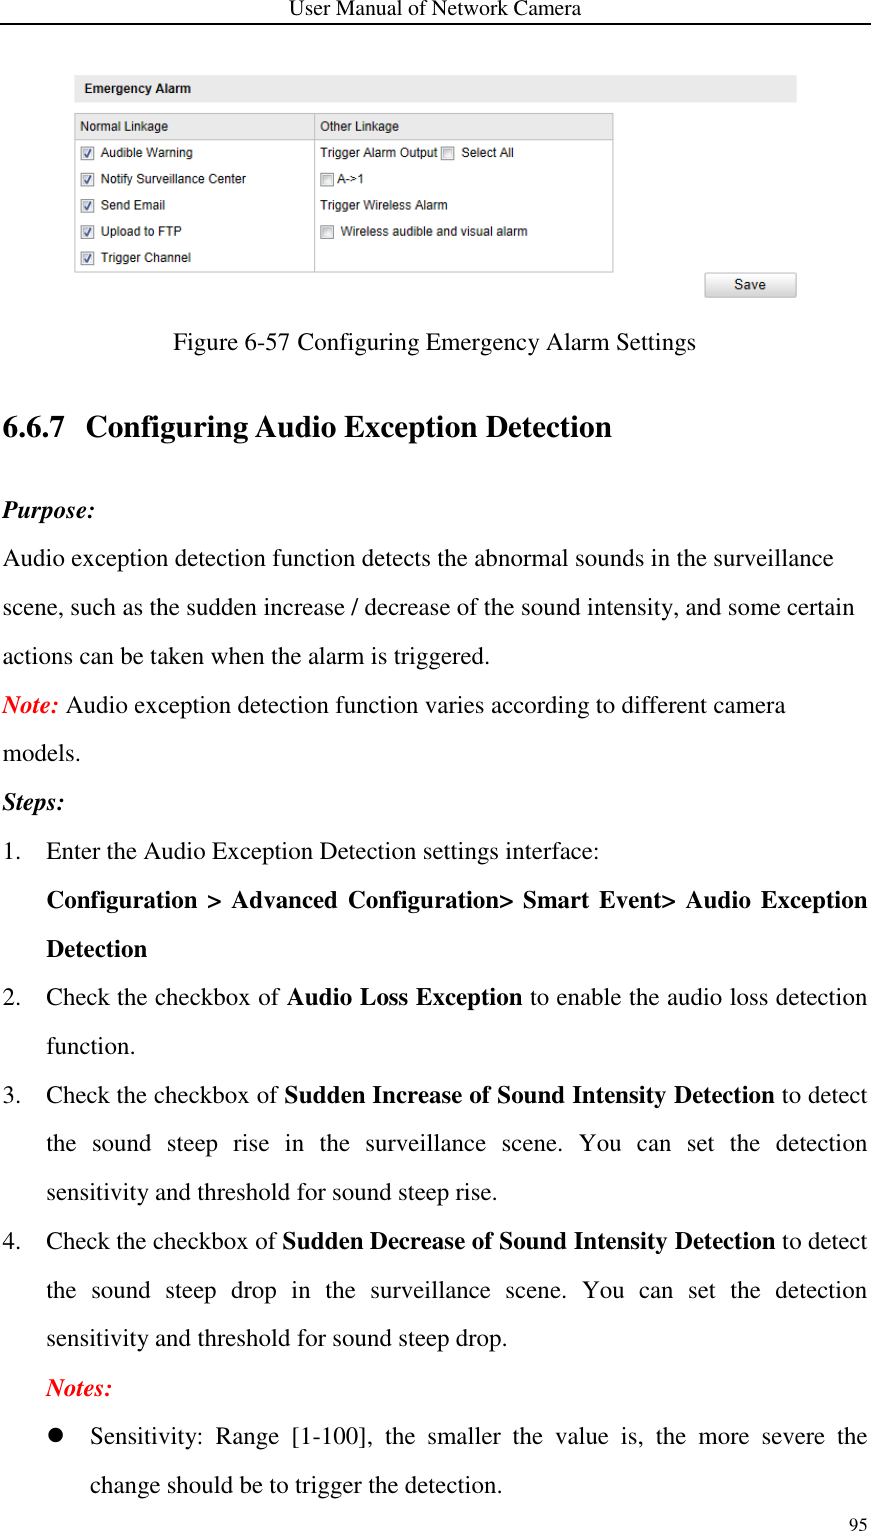 User Manual of Network Camera 95   Figure 6-57 Configuring Emergency Alarm Settings 6.6.7 Configuring Audio Exception Detection Purpose: Audio exception detection function detects the abnormal sounds in the surveillance scene, such as the sudden increase / decrease of the sound intensity, and some certain actions can be taken when the alarm is triggered. Note: Audio exception detection function varies according to different camera models. Steps: 1. Enter the Audio Exception Detection settings interface:  Configuration &gt; Advanced Configuration&gt; Smart Event&gt; Audio Exception Detection 2. Check the checkbox of Audio Loss Exception to enable the audio loss detection function. 3. Check the checkbox of Sudden Increase of Sound Intensity Detection to detect the  sound  steep  rise  in  the  surveillance  scene.  You  can  set  the  detection sensitivity and threshold for sound steep rise. 4. Check the checkbox of Sudden Decrease of Sound Intensity Detection to detect the  sound  steep  drop  in  the  surveillance  scene.  You  can  set  the  detection sensitivity and threshold for sound steep drop. Notes:  Sensitivity:  Range  [1-100],  the  smaller  the  value  is,  the  more  severe  the change should be to trigger the detection.   